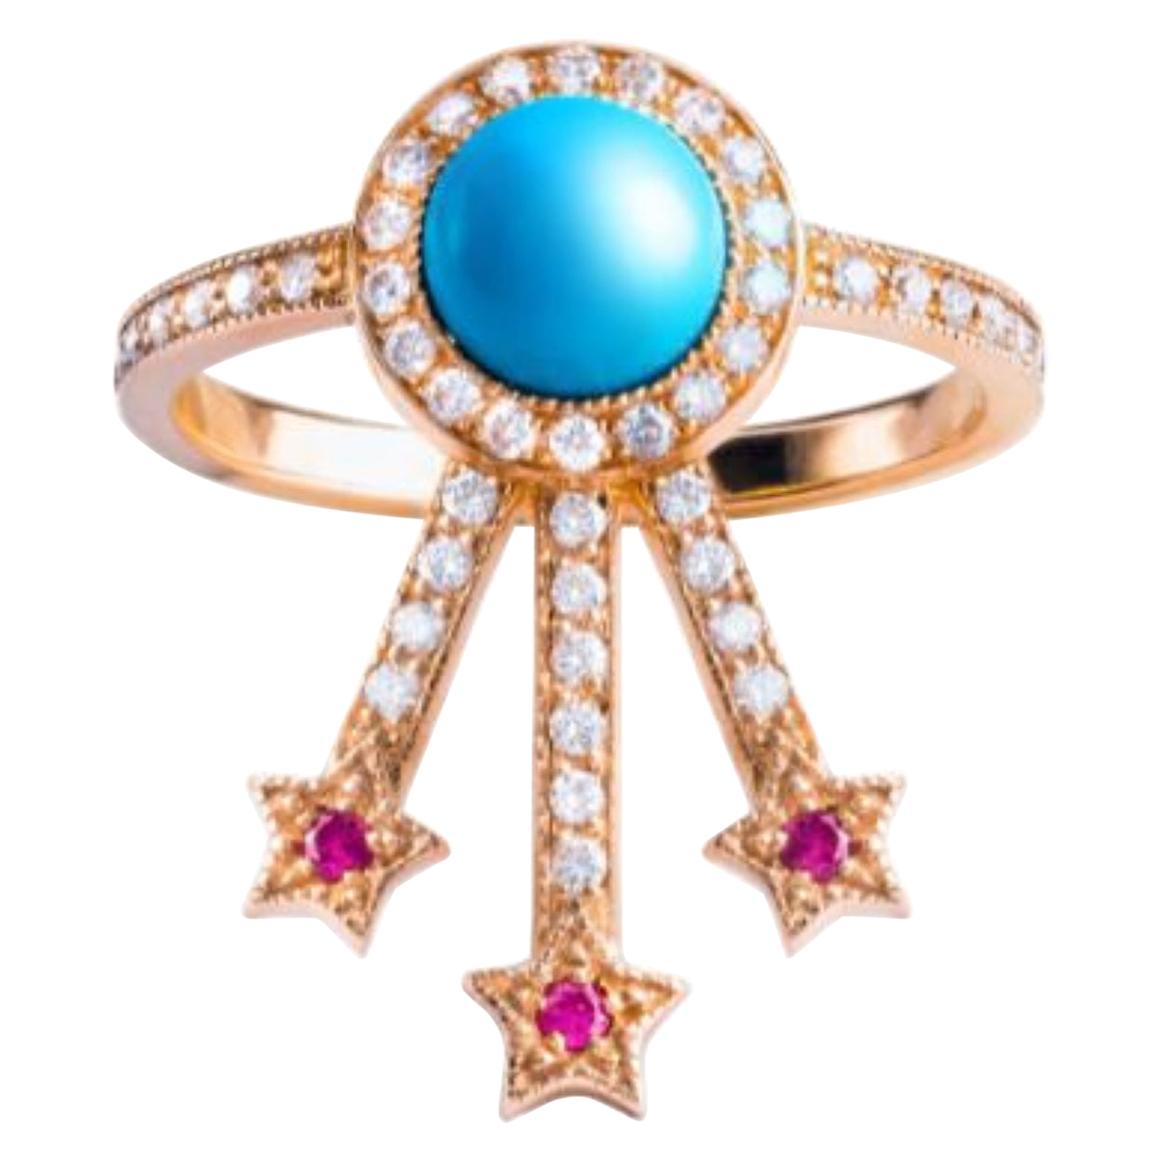 Alcylone Ring, Turquoise, Rubies, 18 Karat Rose Gold For Sale